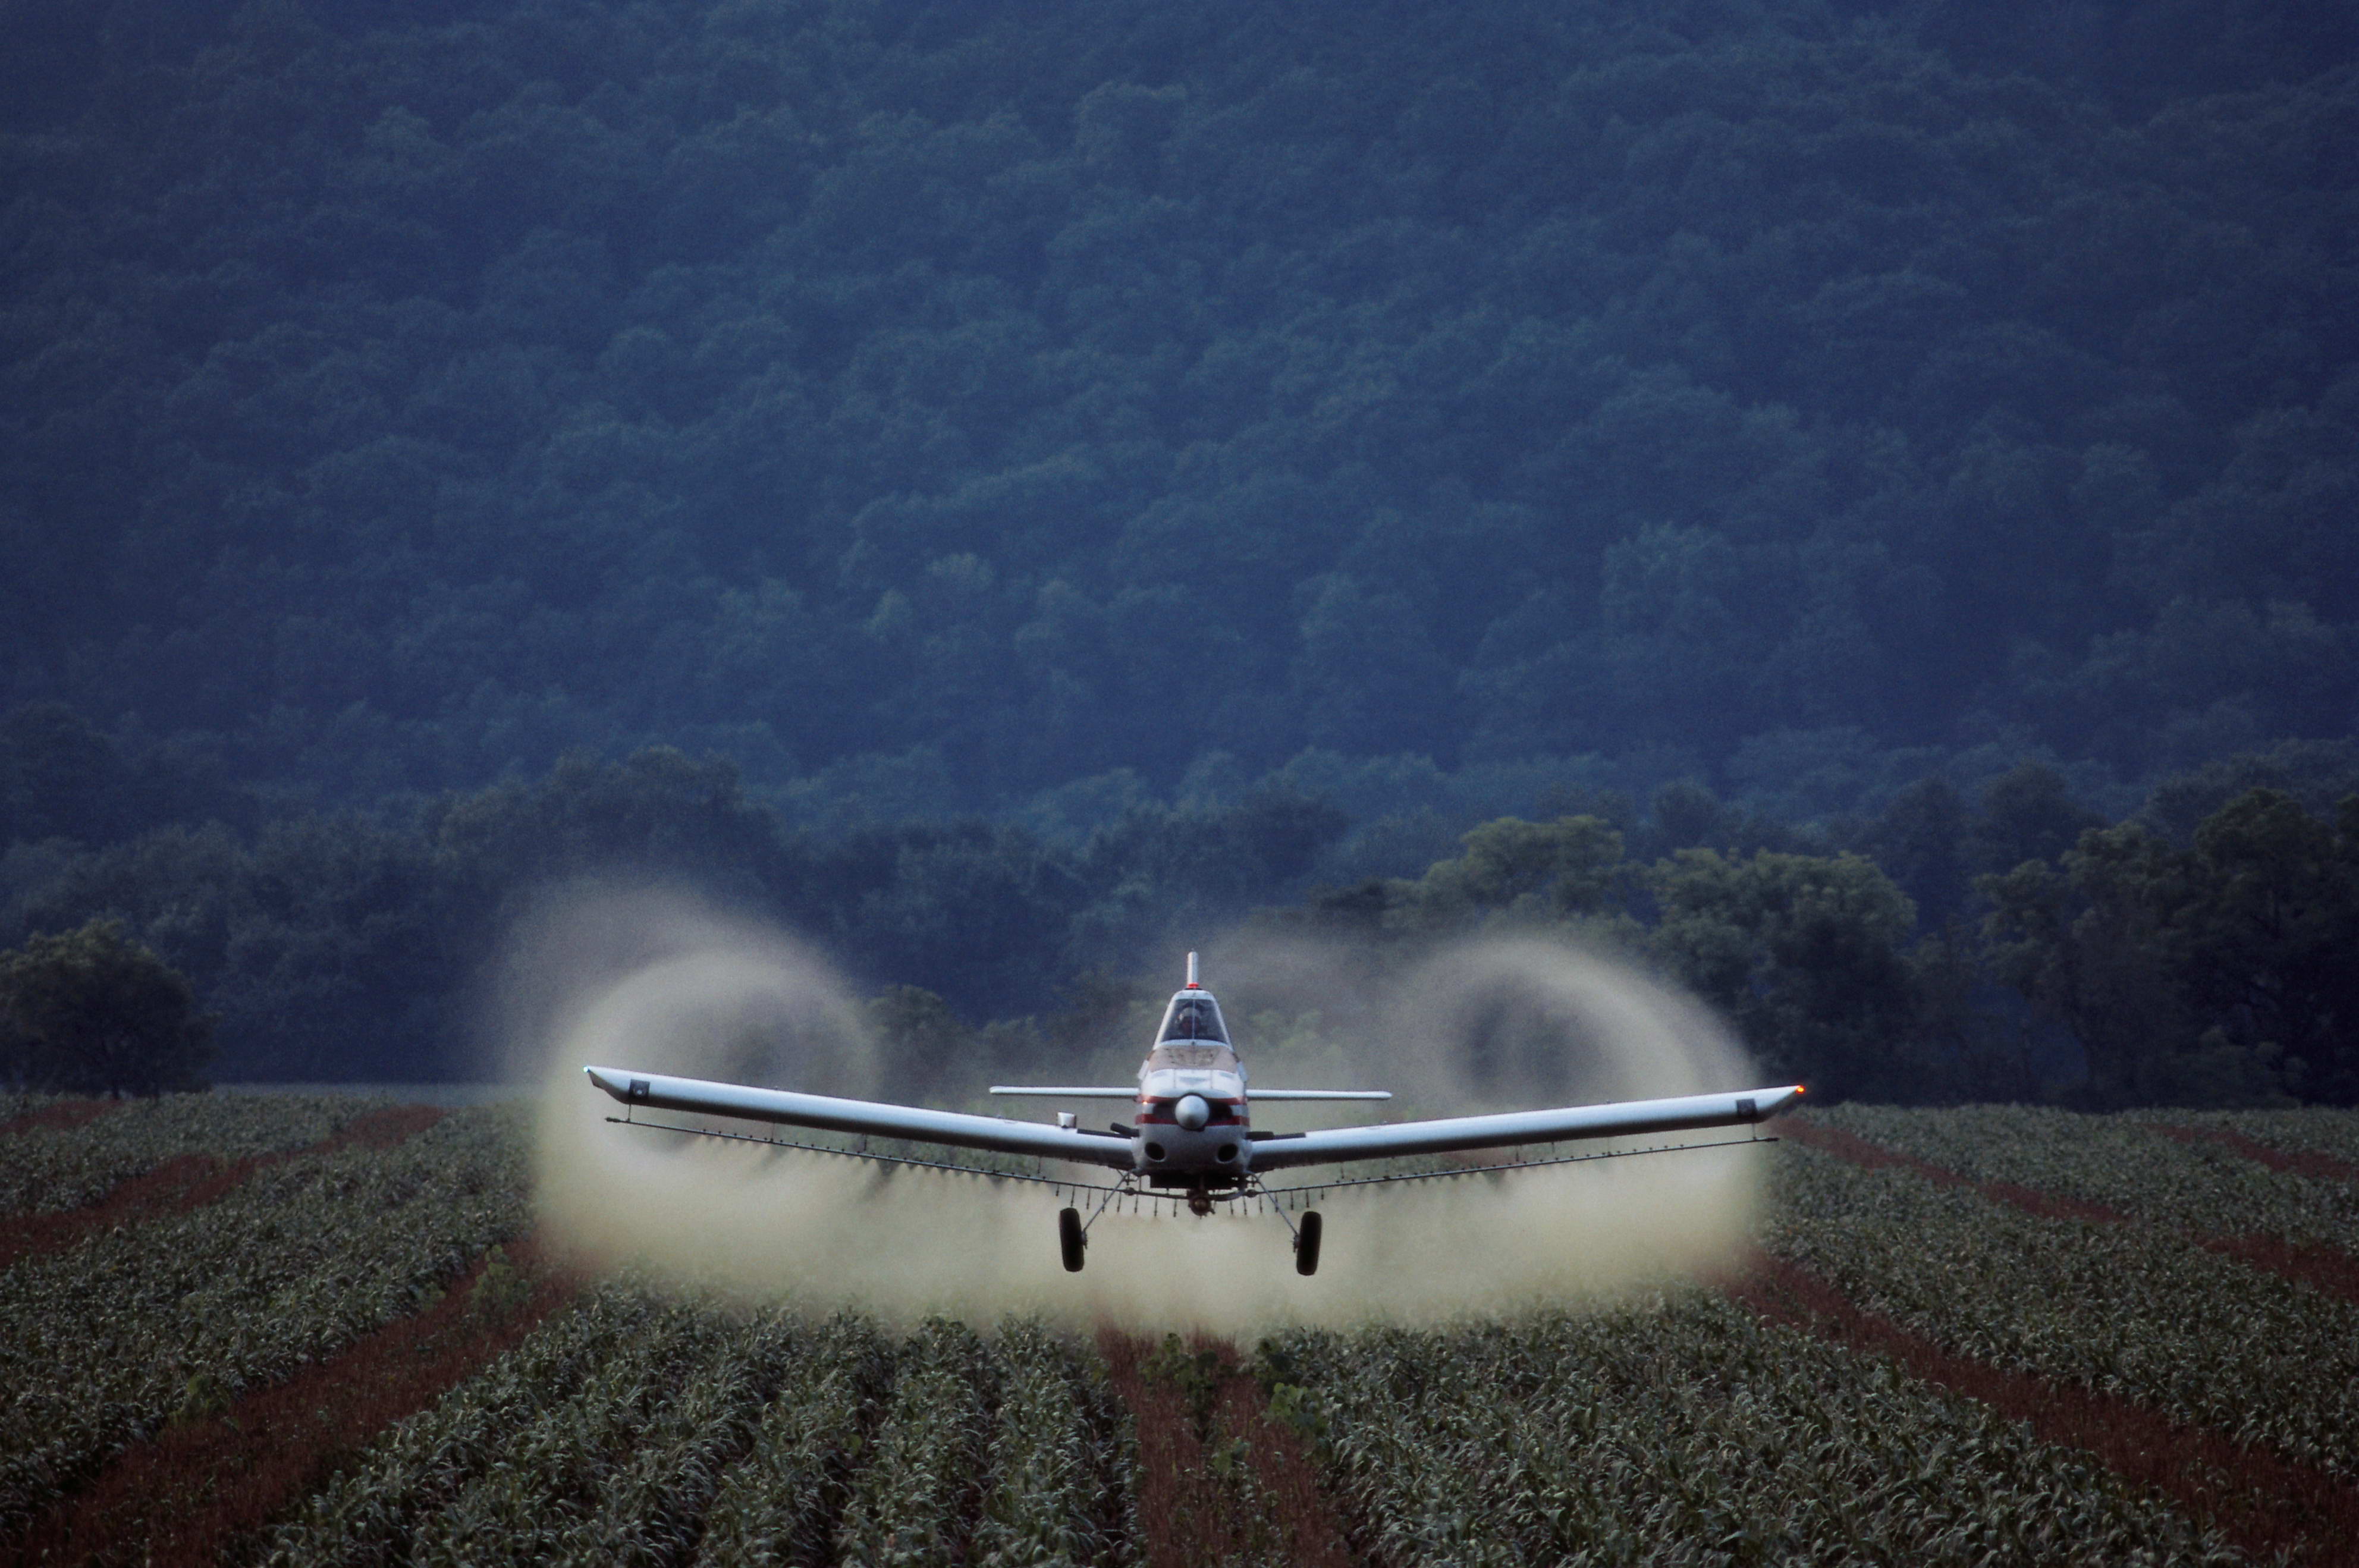 It is time for nerve gas pesticides to go, starting with chlorpyrifos.